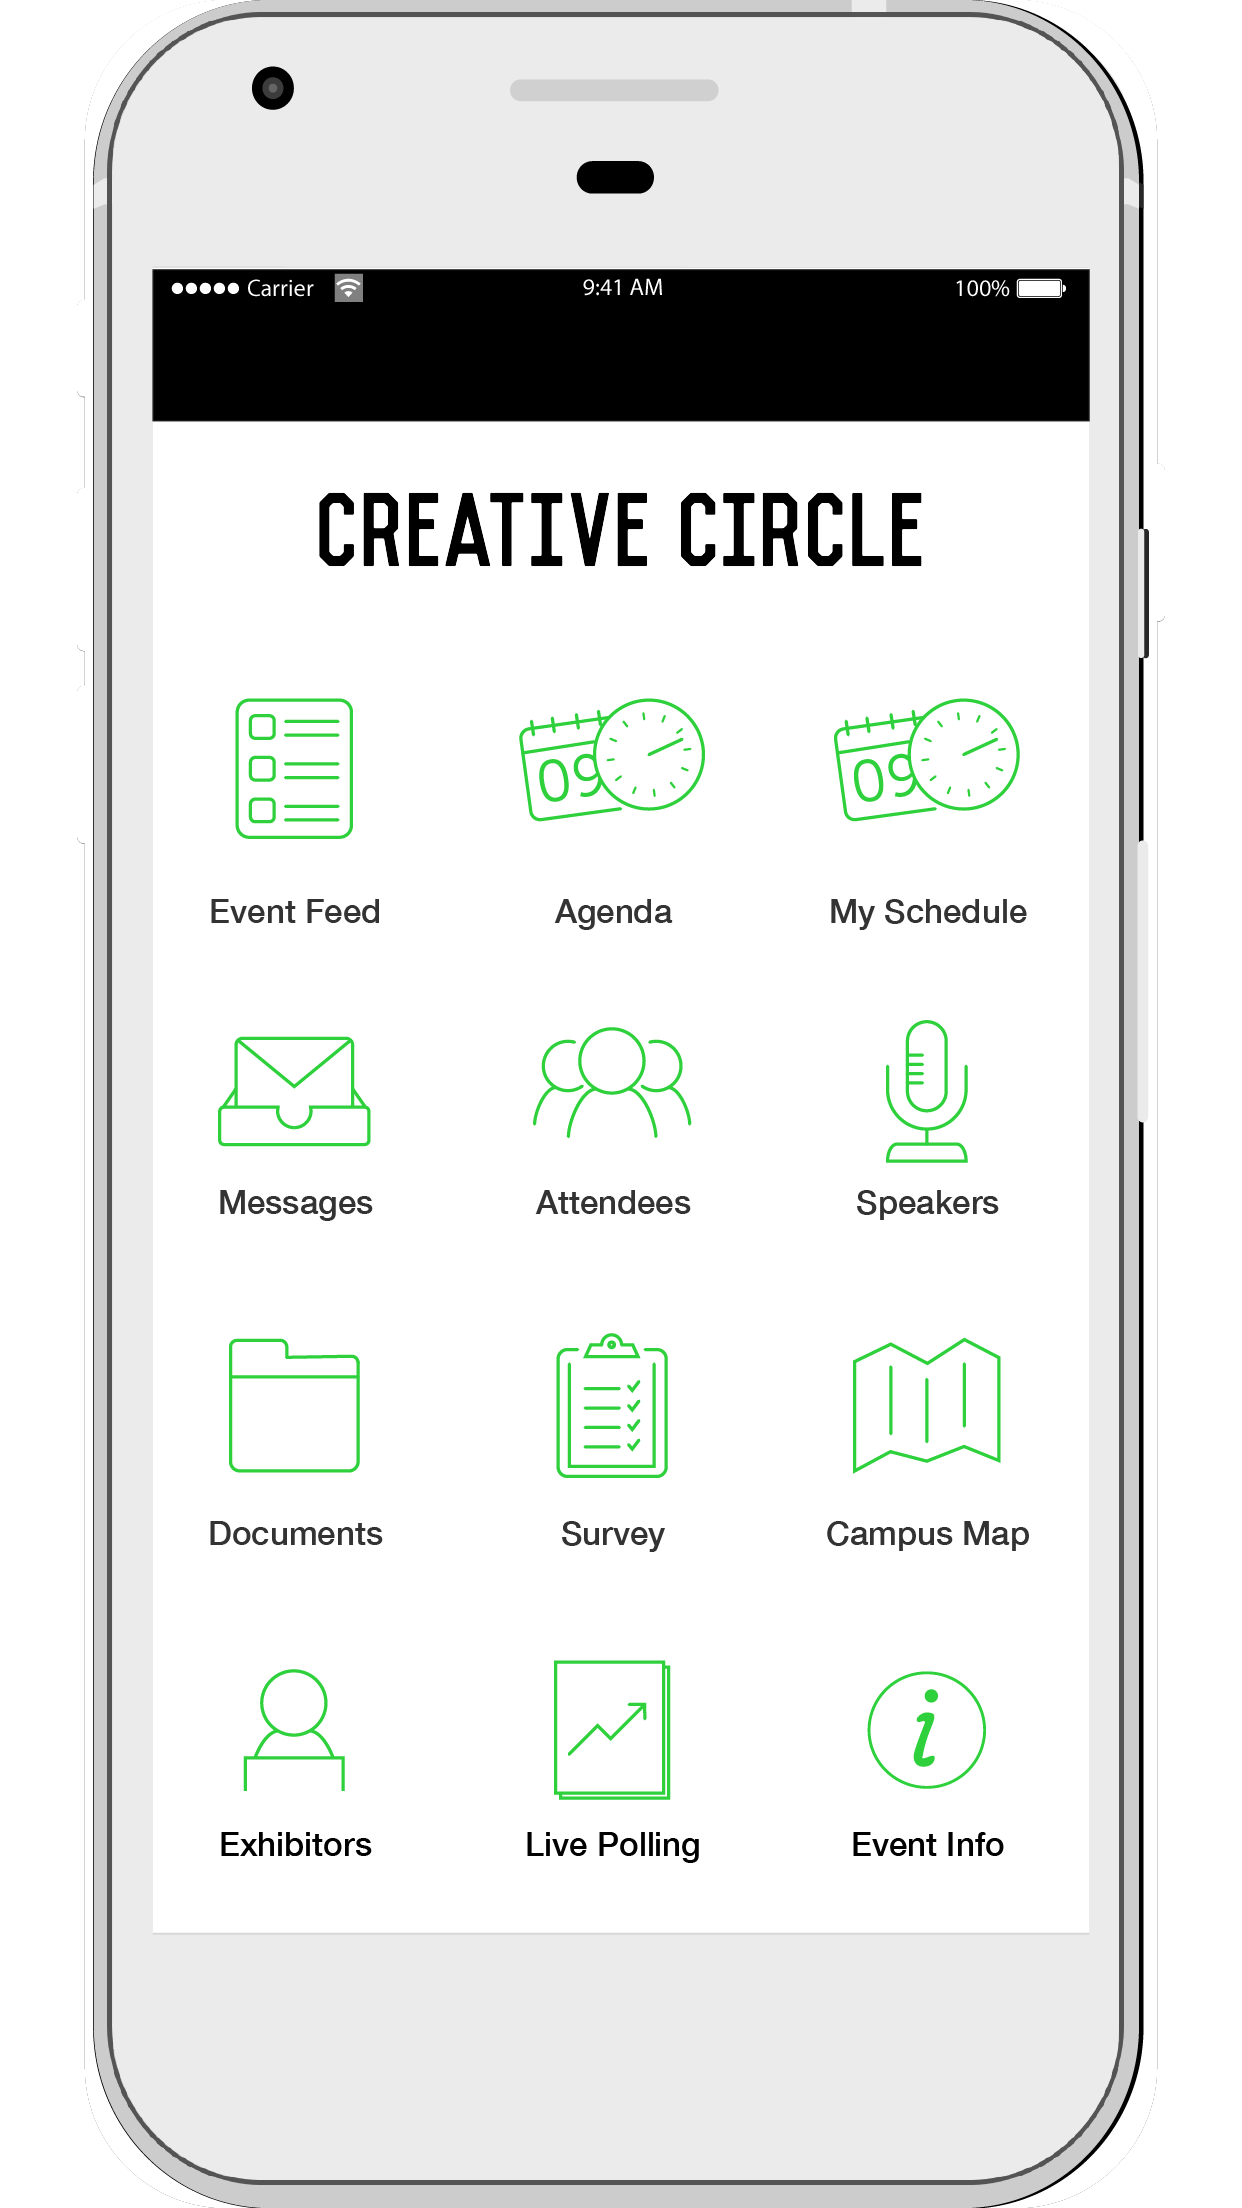 The Creative Circle Relaunches App for 2017